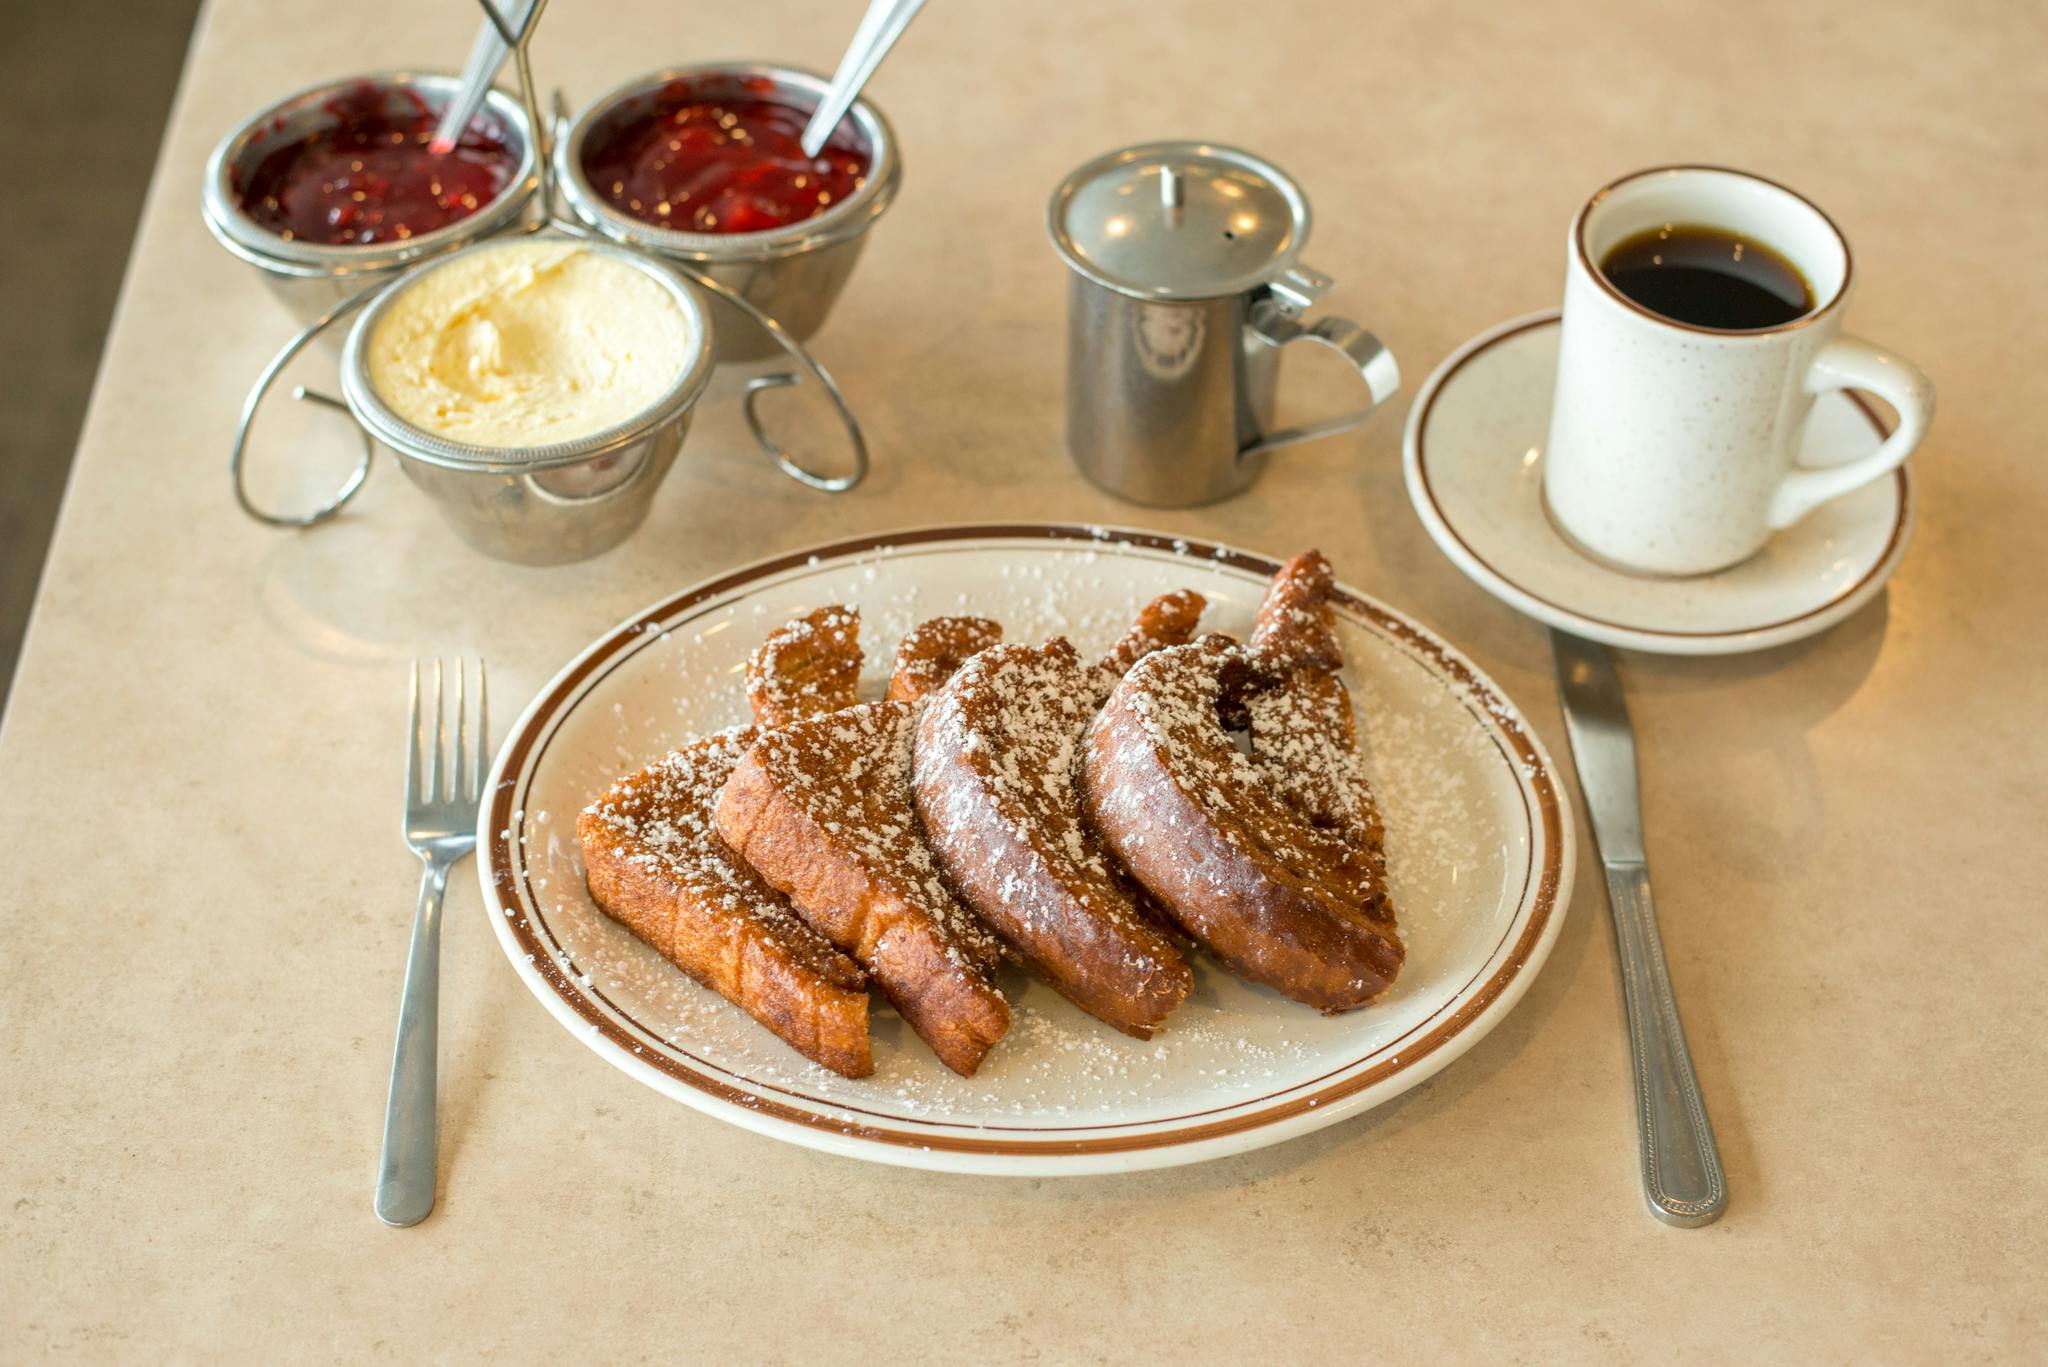 Cinnamon French Toast Breakfast from The Pancake Place in Green Bay, WI